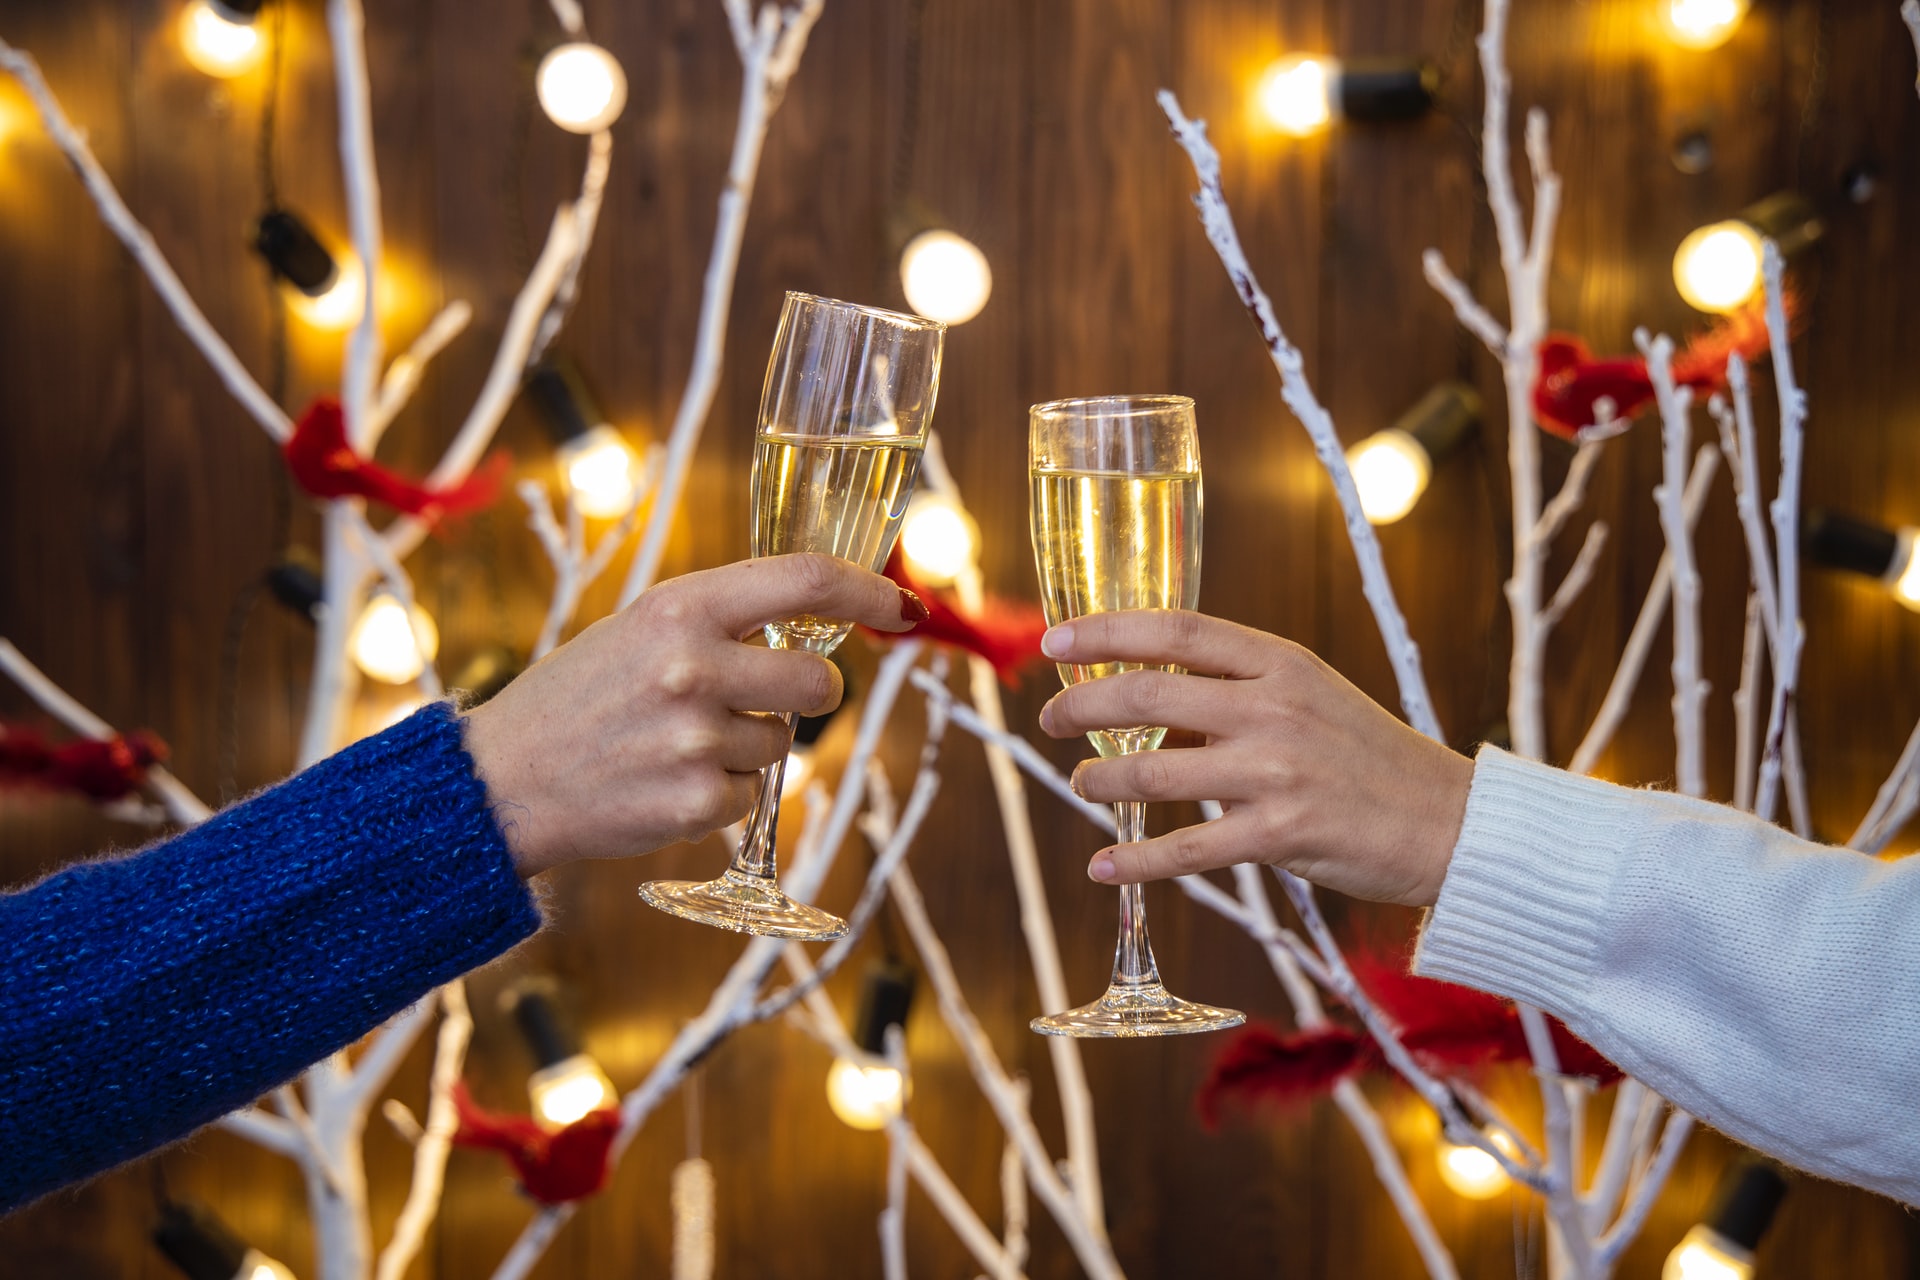 5 Christmas party ideas to wow your coworkers